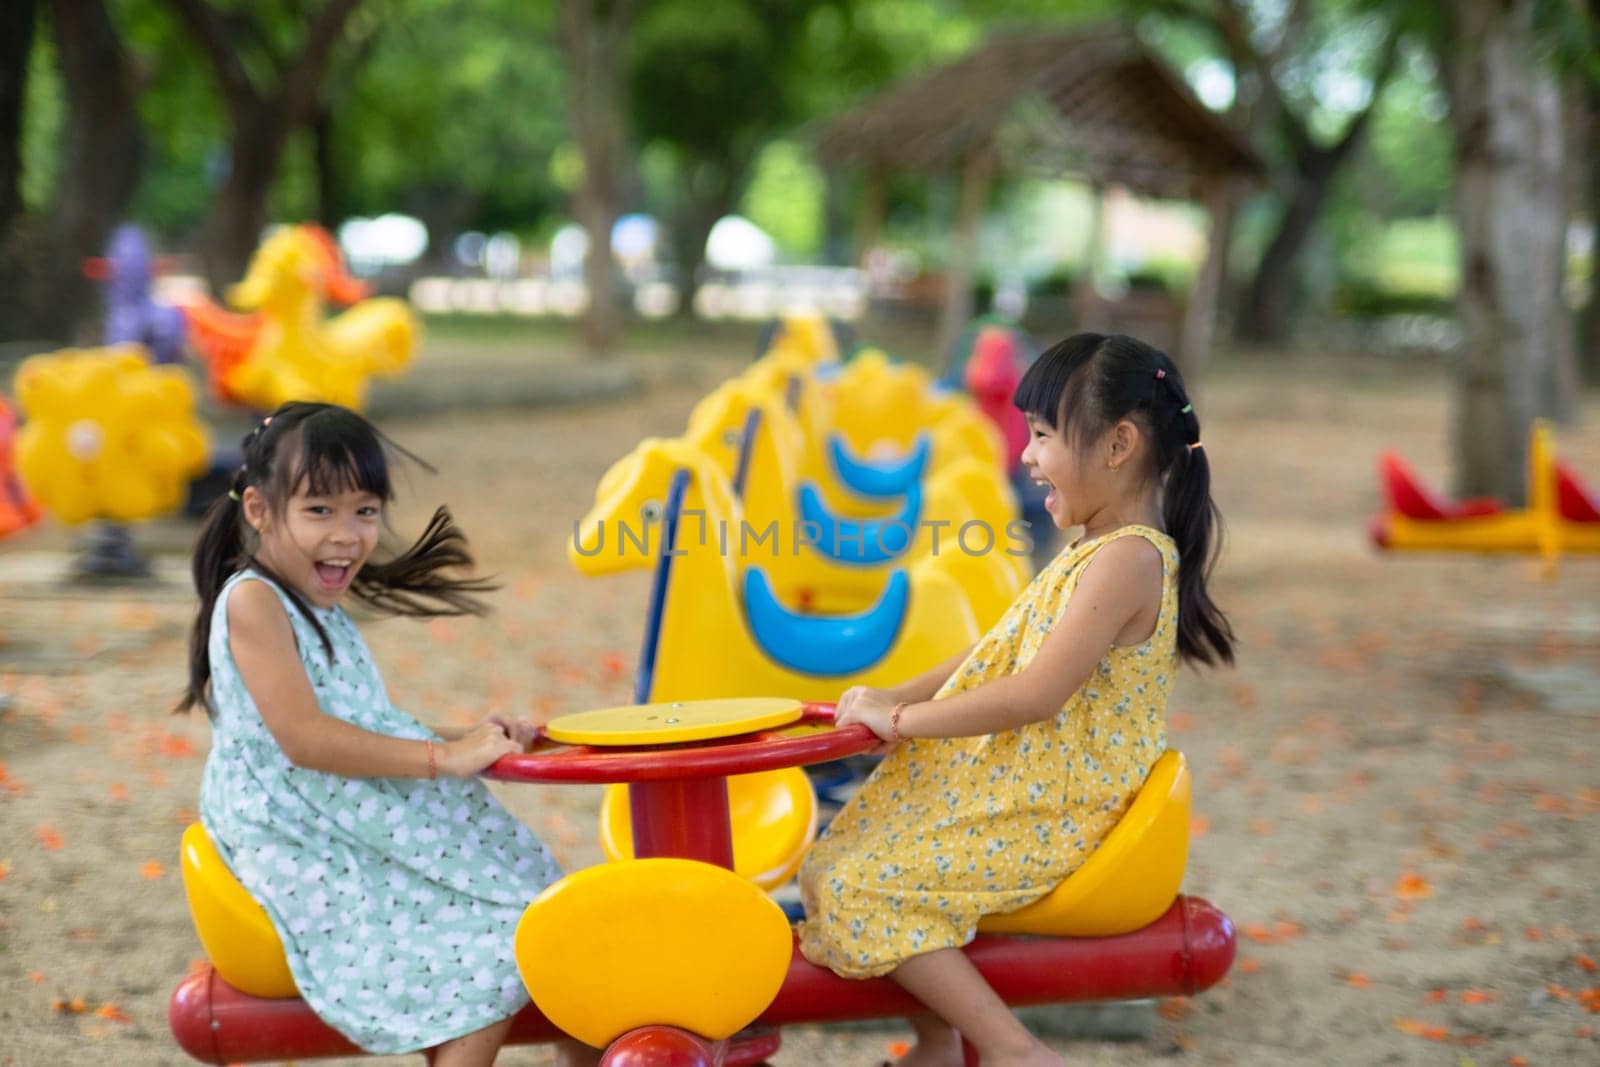 Children sit on a carousel in the playground together. Children playing at outdoor playground in the park on summer vacation. Healthy activity.